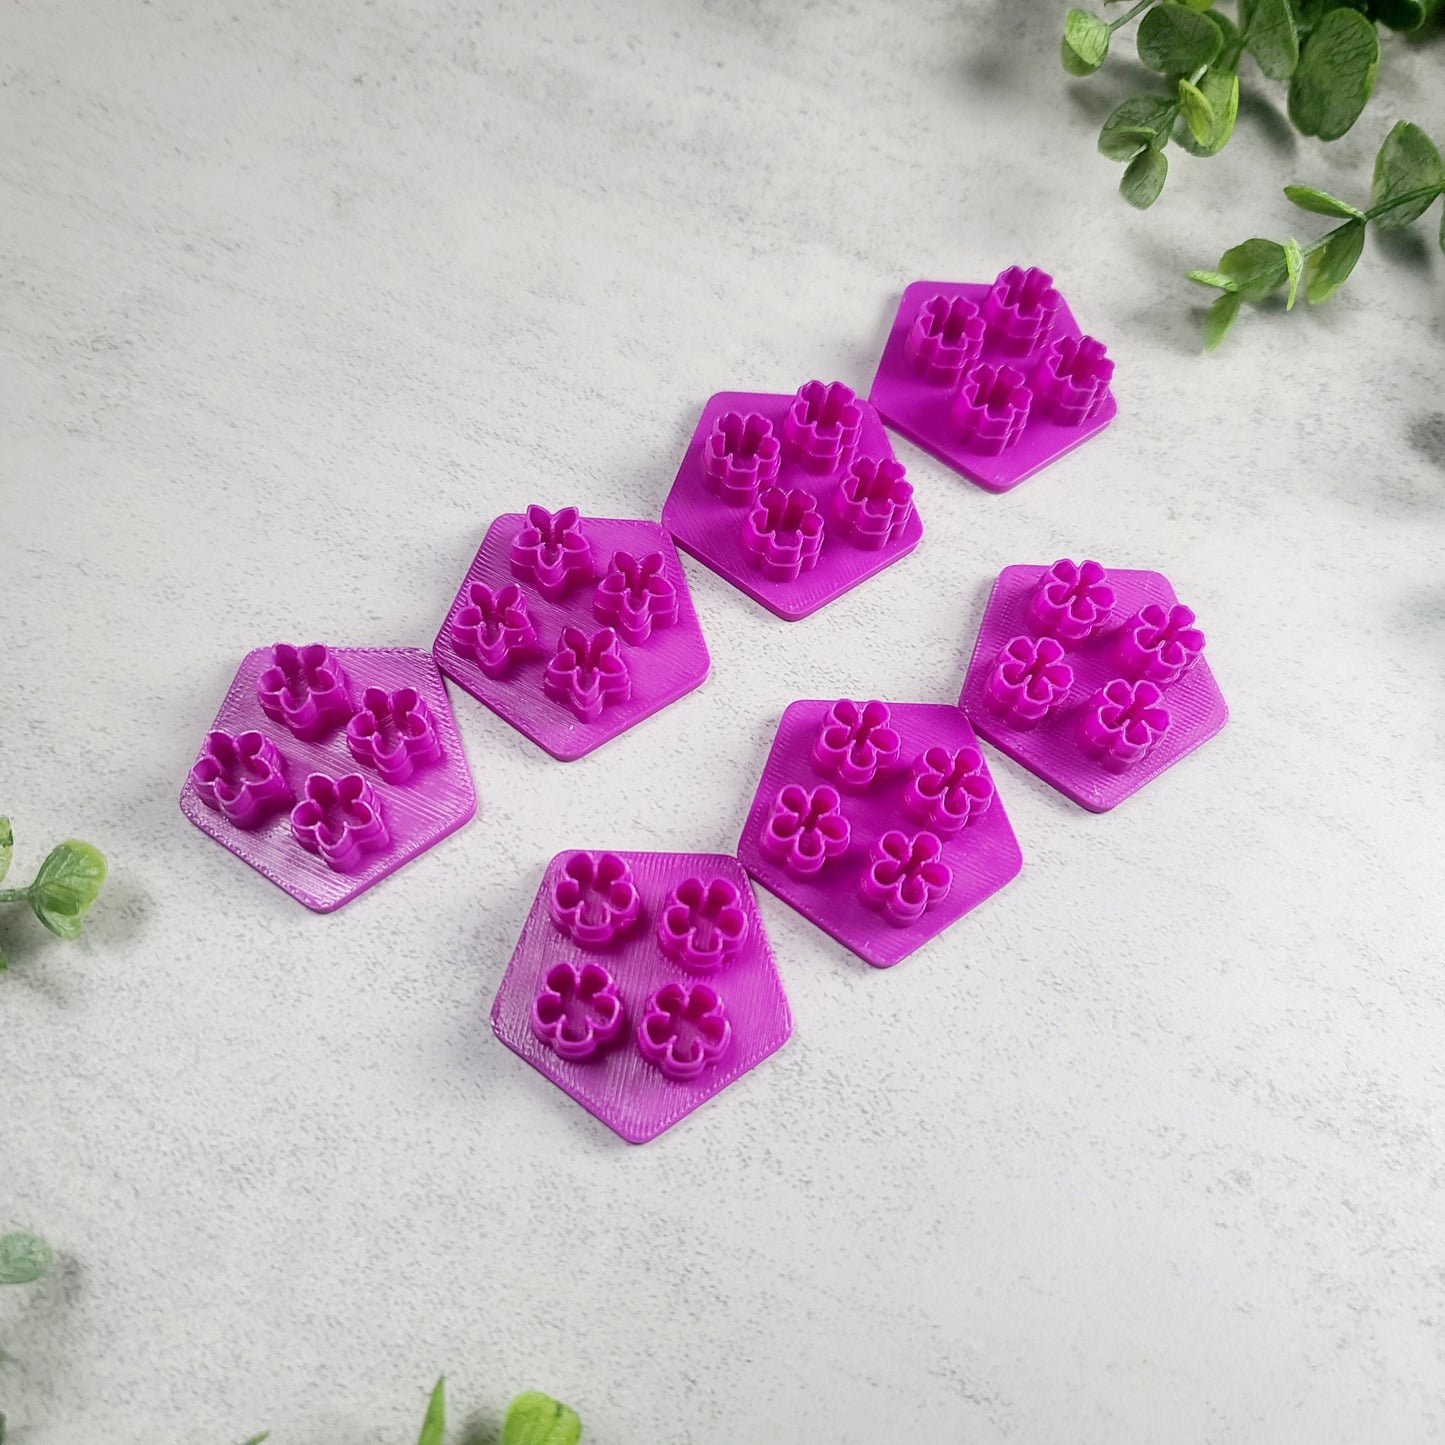 Mini Flower Polymer Clay Cutters, Micro Floral Clay Cutters